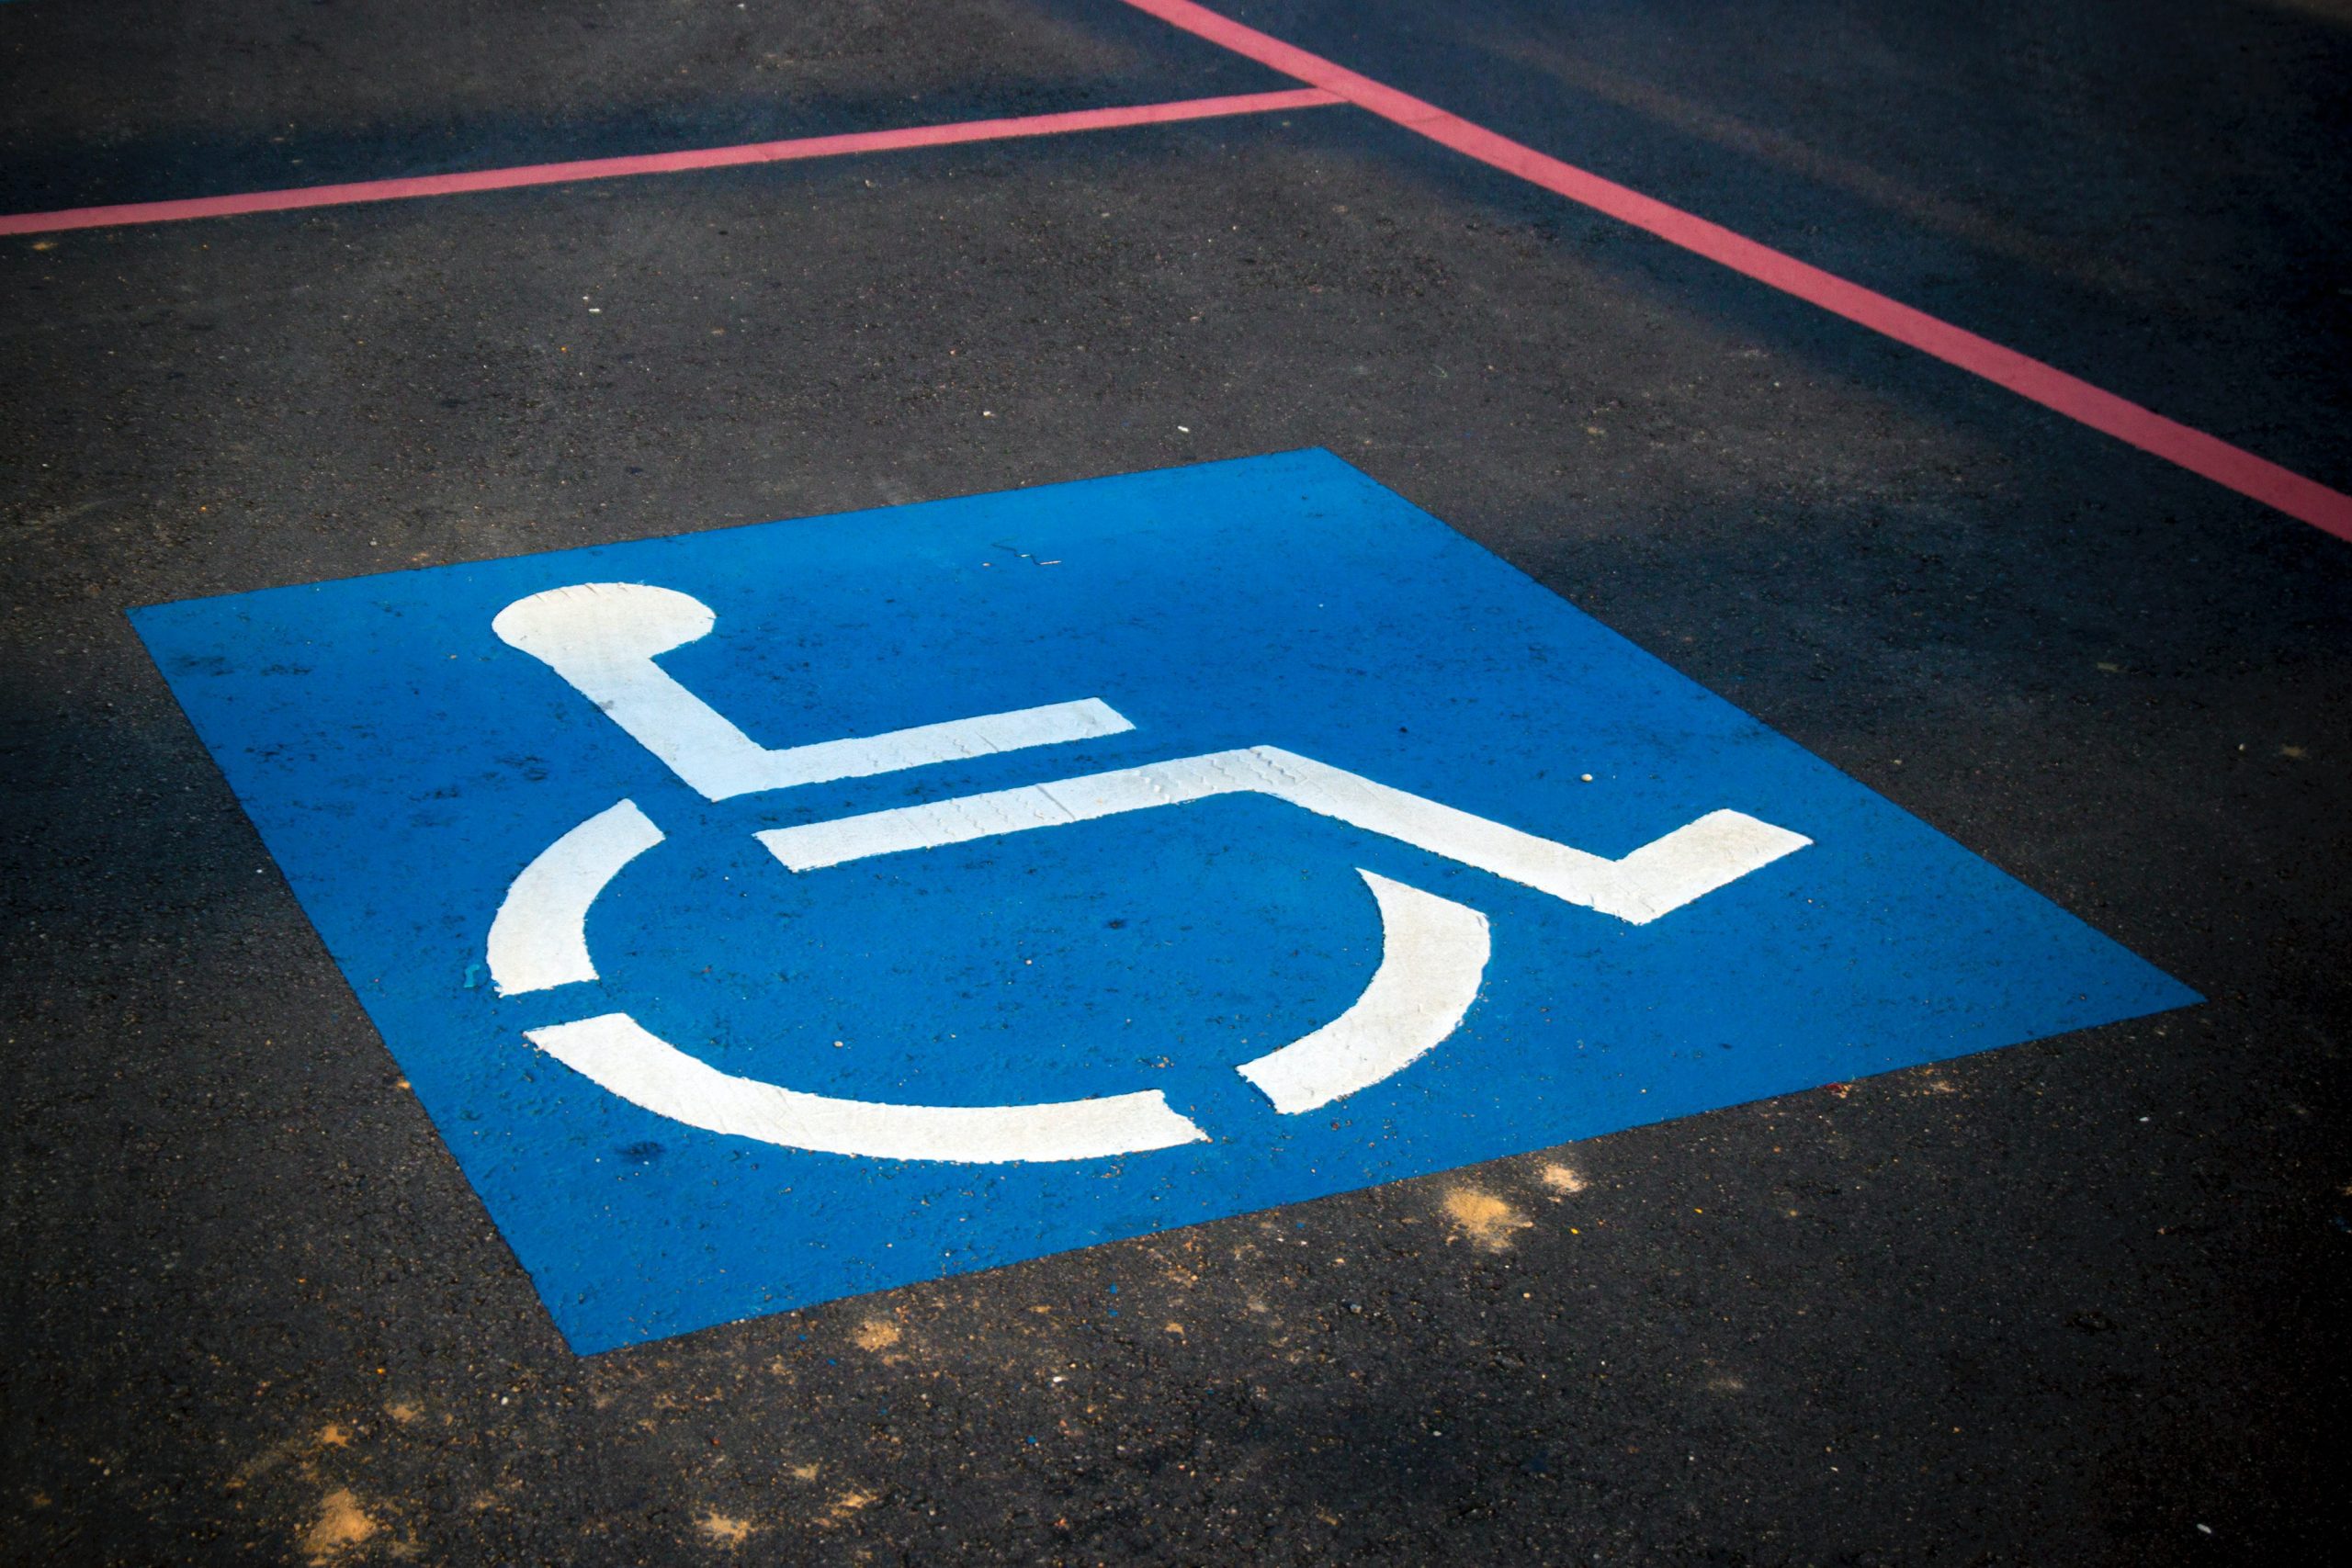 Comply with ADA Standards Easily with AccessiBe